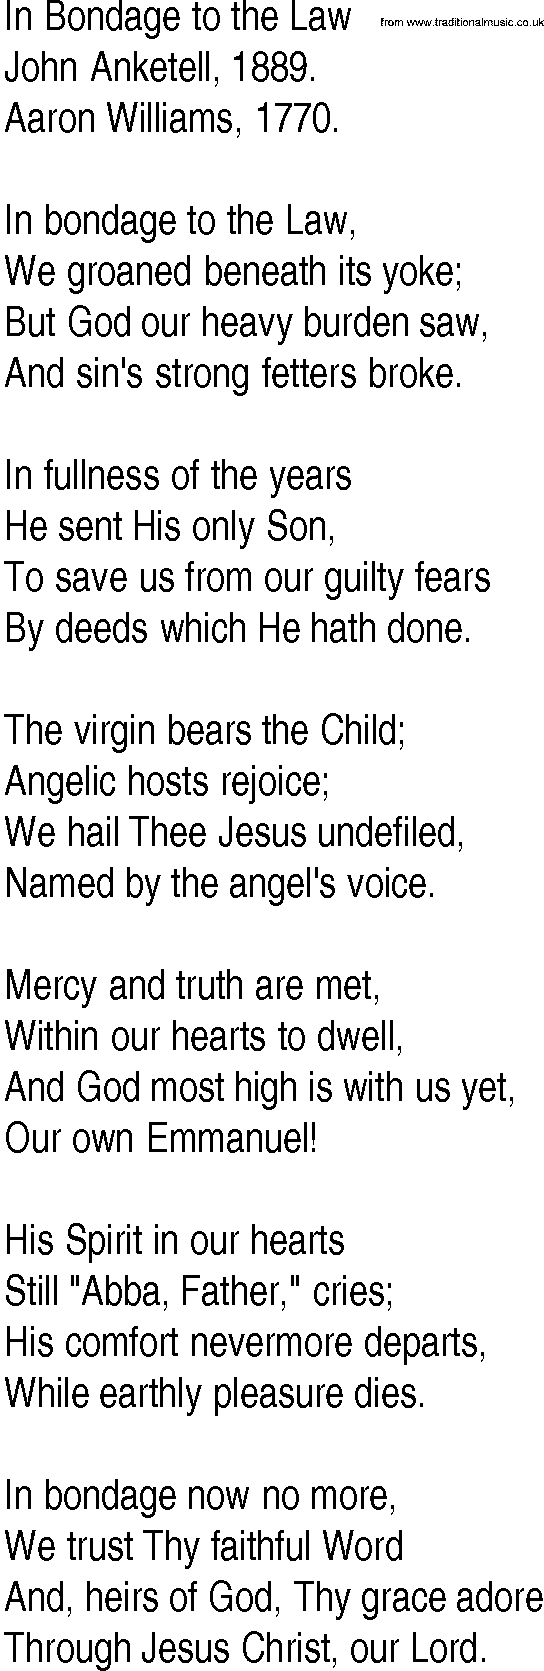 Hymn and Gospel Song: In Bondage to the Law by John Anketell lyrics